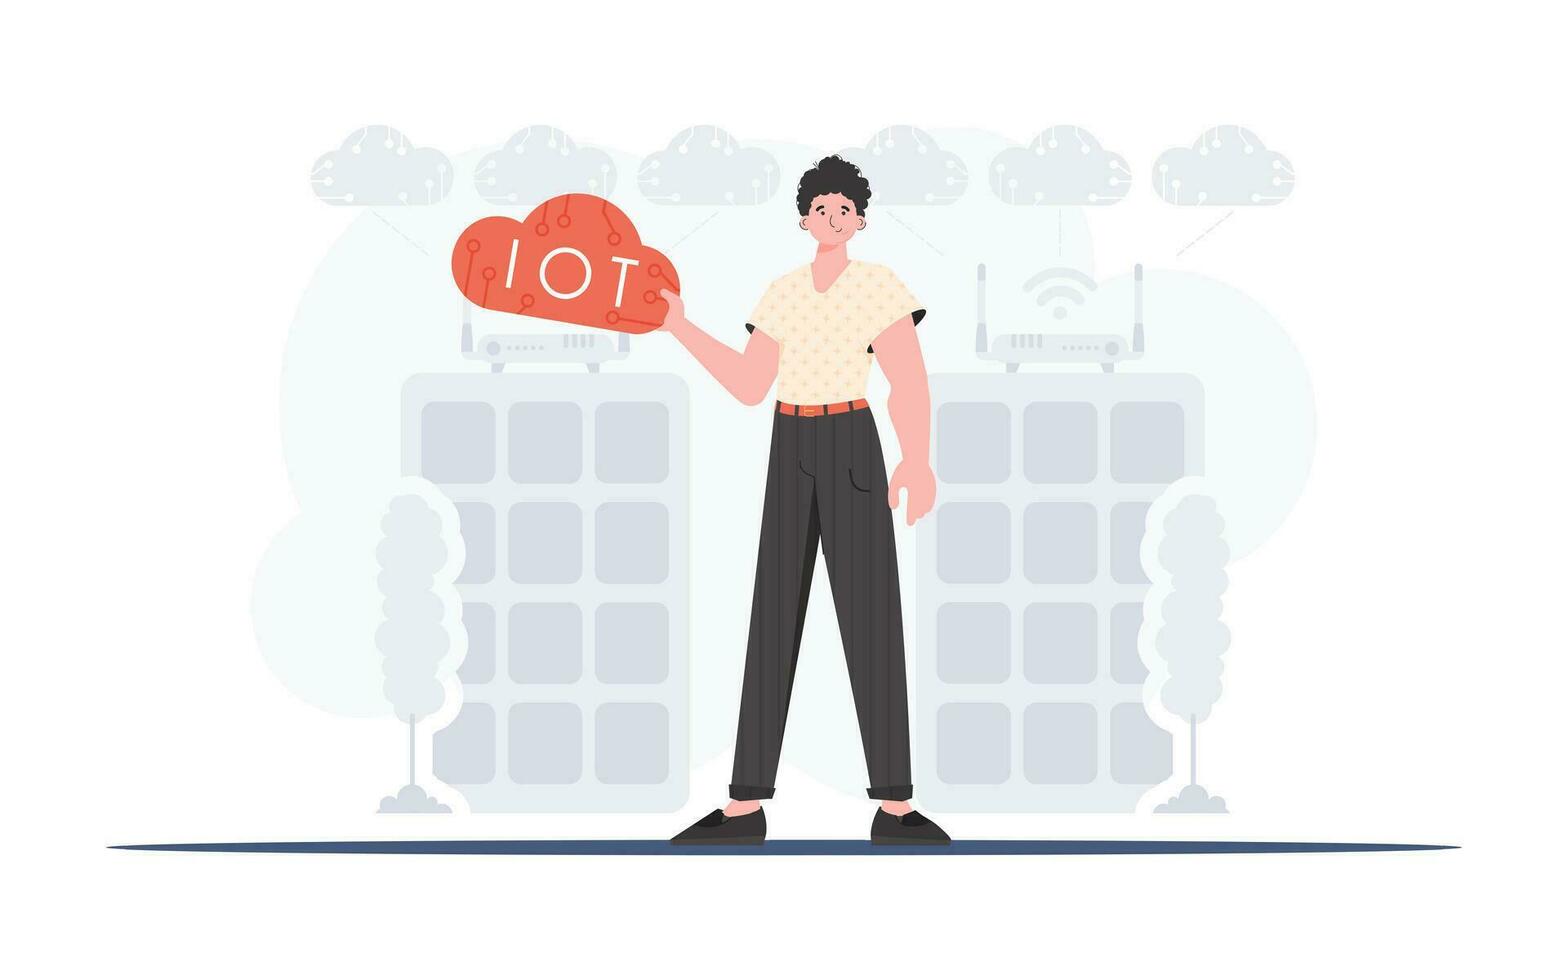 The guy is holding an internet thing icon in his hands. IoT concept. Good for websites and presentations. Vector illustration.